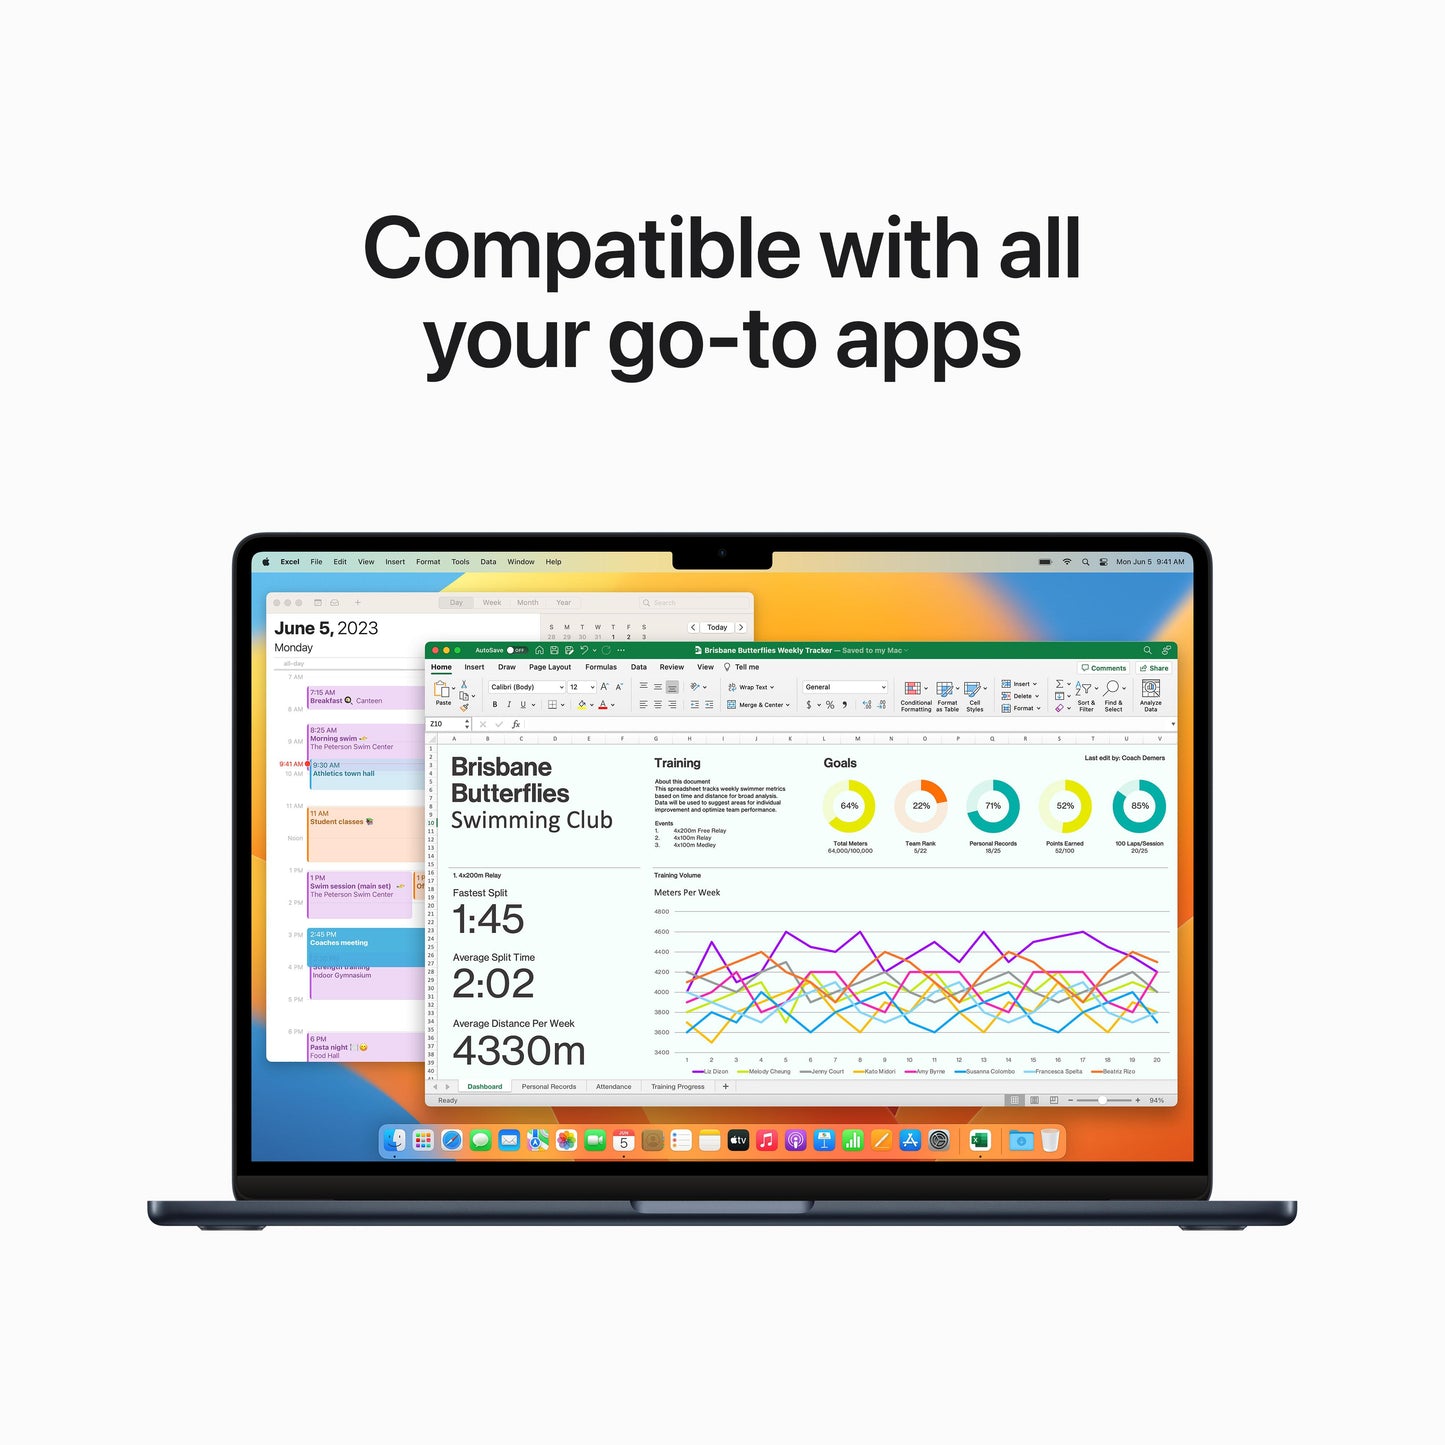 15-inch MacBook Air: Apple M2 chip with 8‑core CPU and 10‑core GPU, 512GB SSD - Midnight